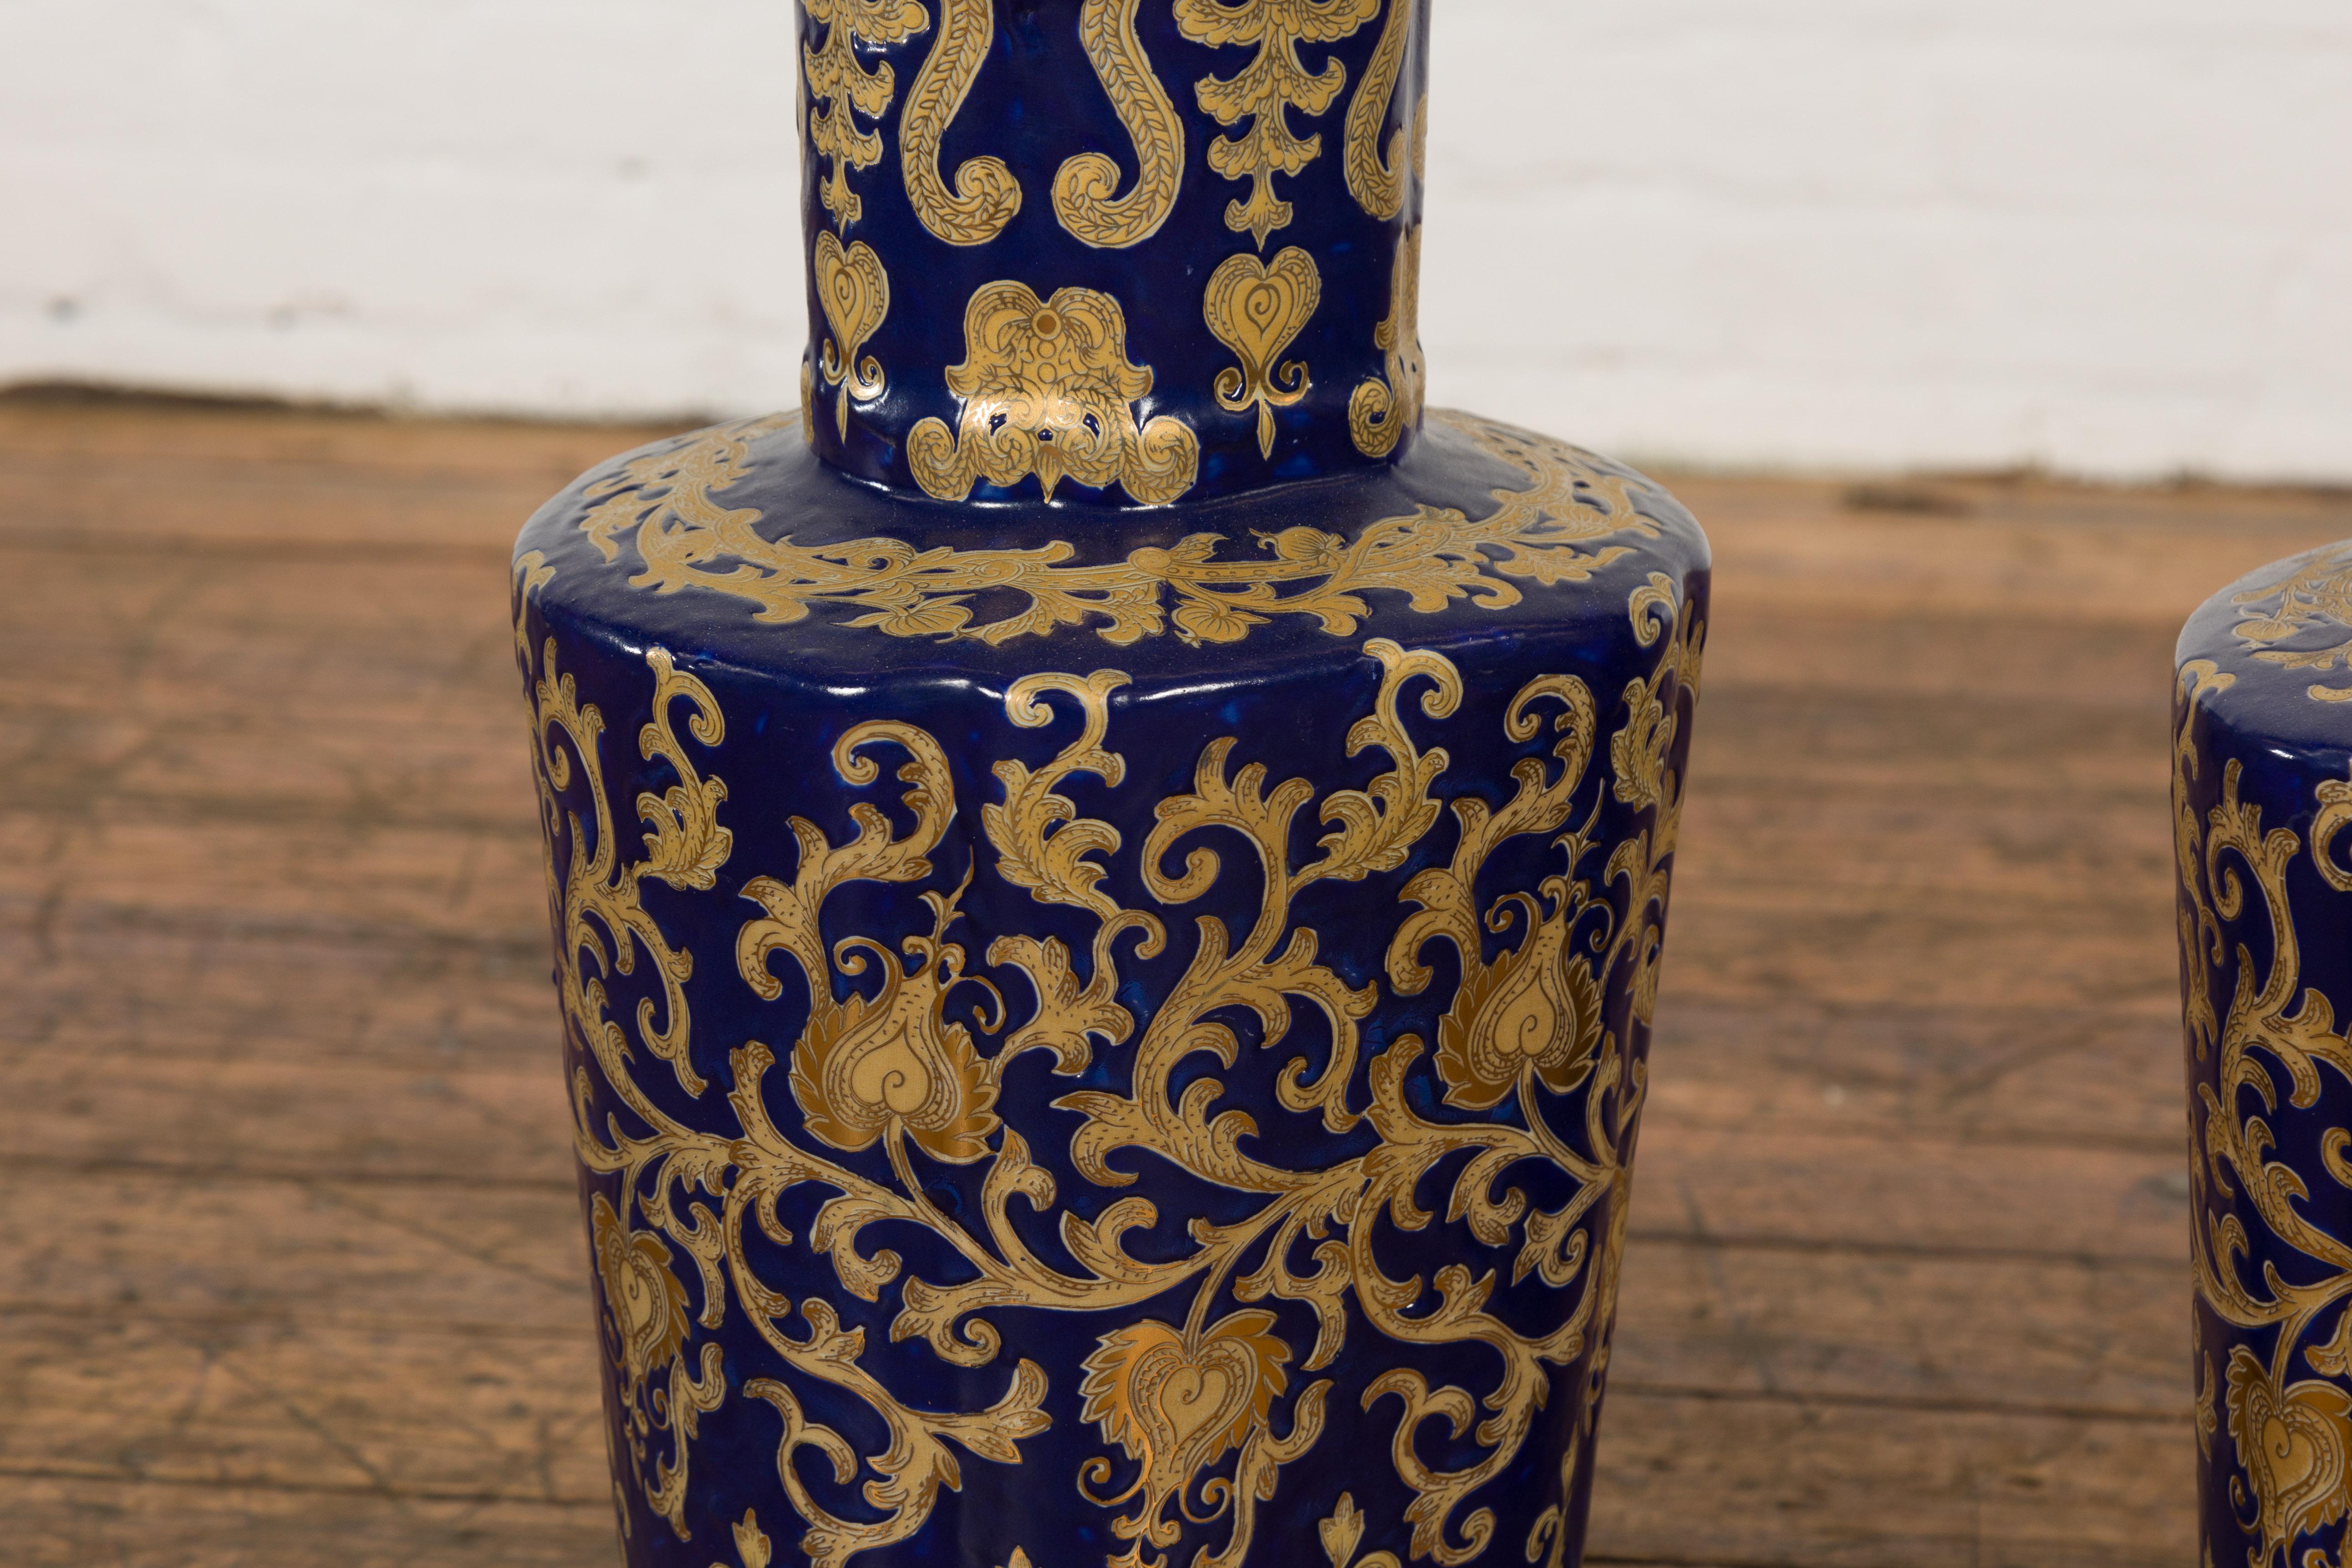 Pair of Dark Blue and Gold Vintage Vases with Intricate Design For Sale 3